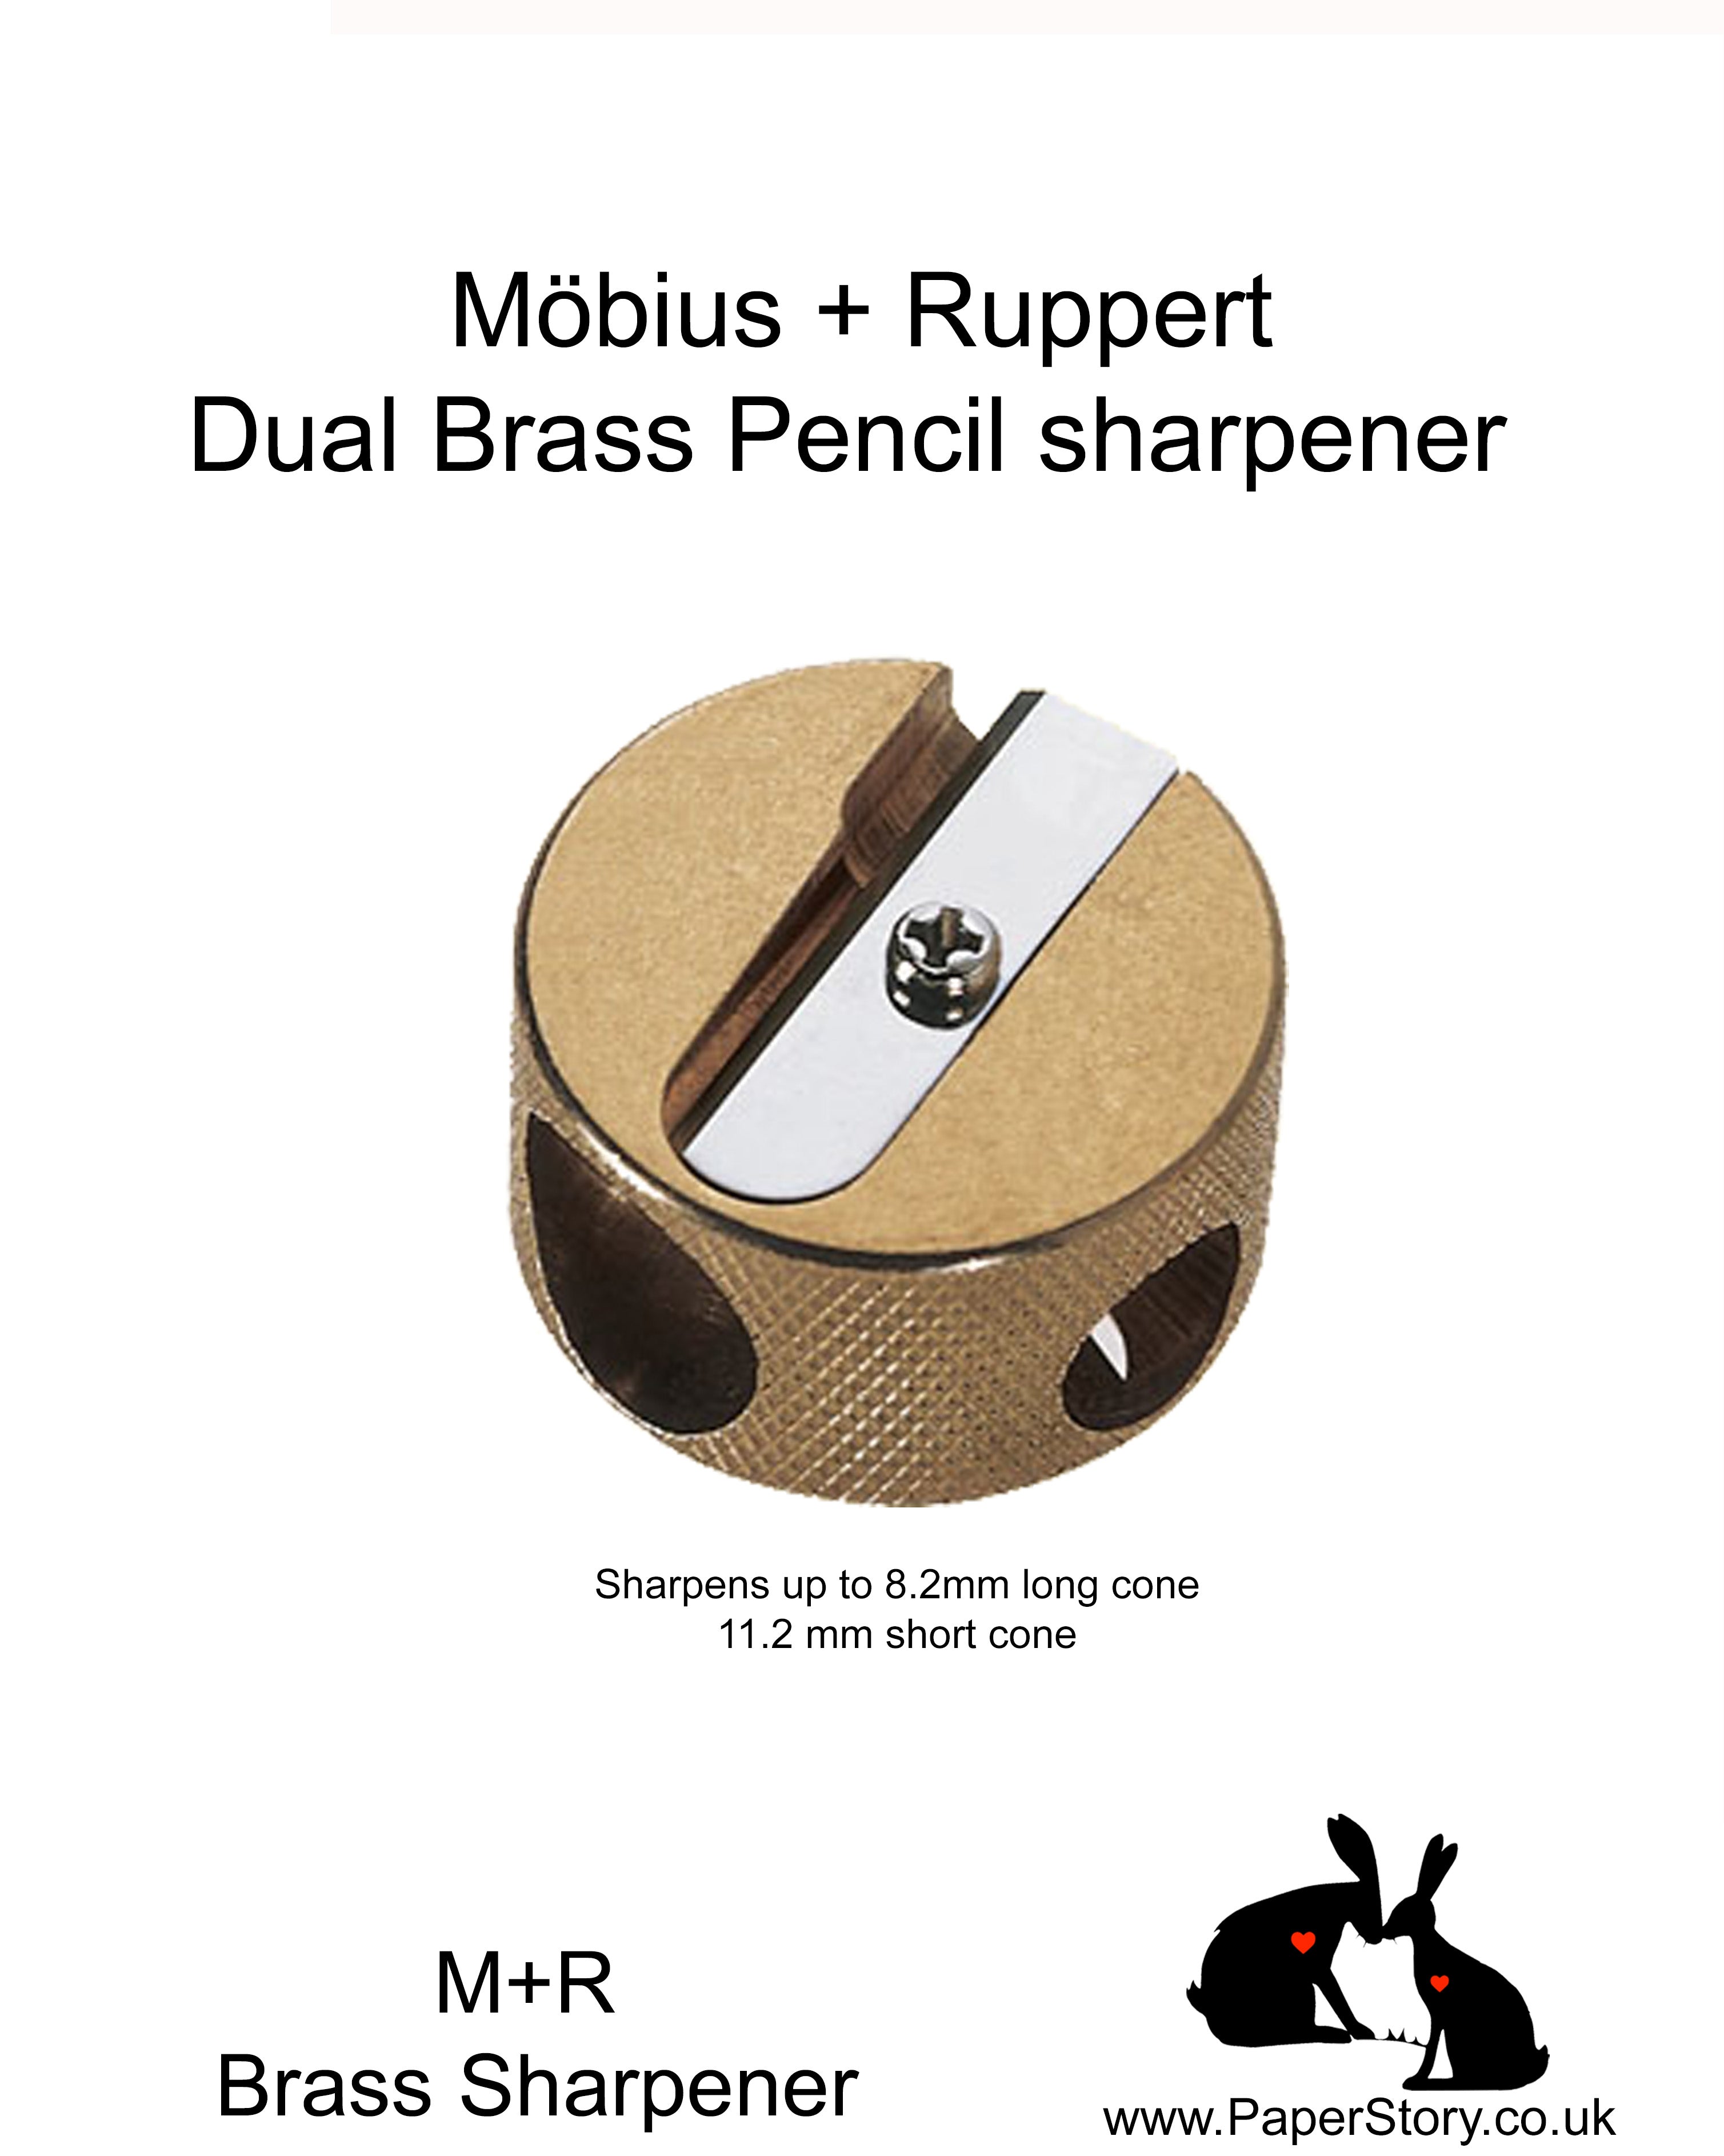 M+R Mobius + Ruppert Double Hole Brass round pencil sharpener DISCOS